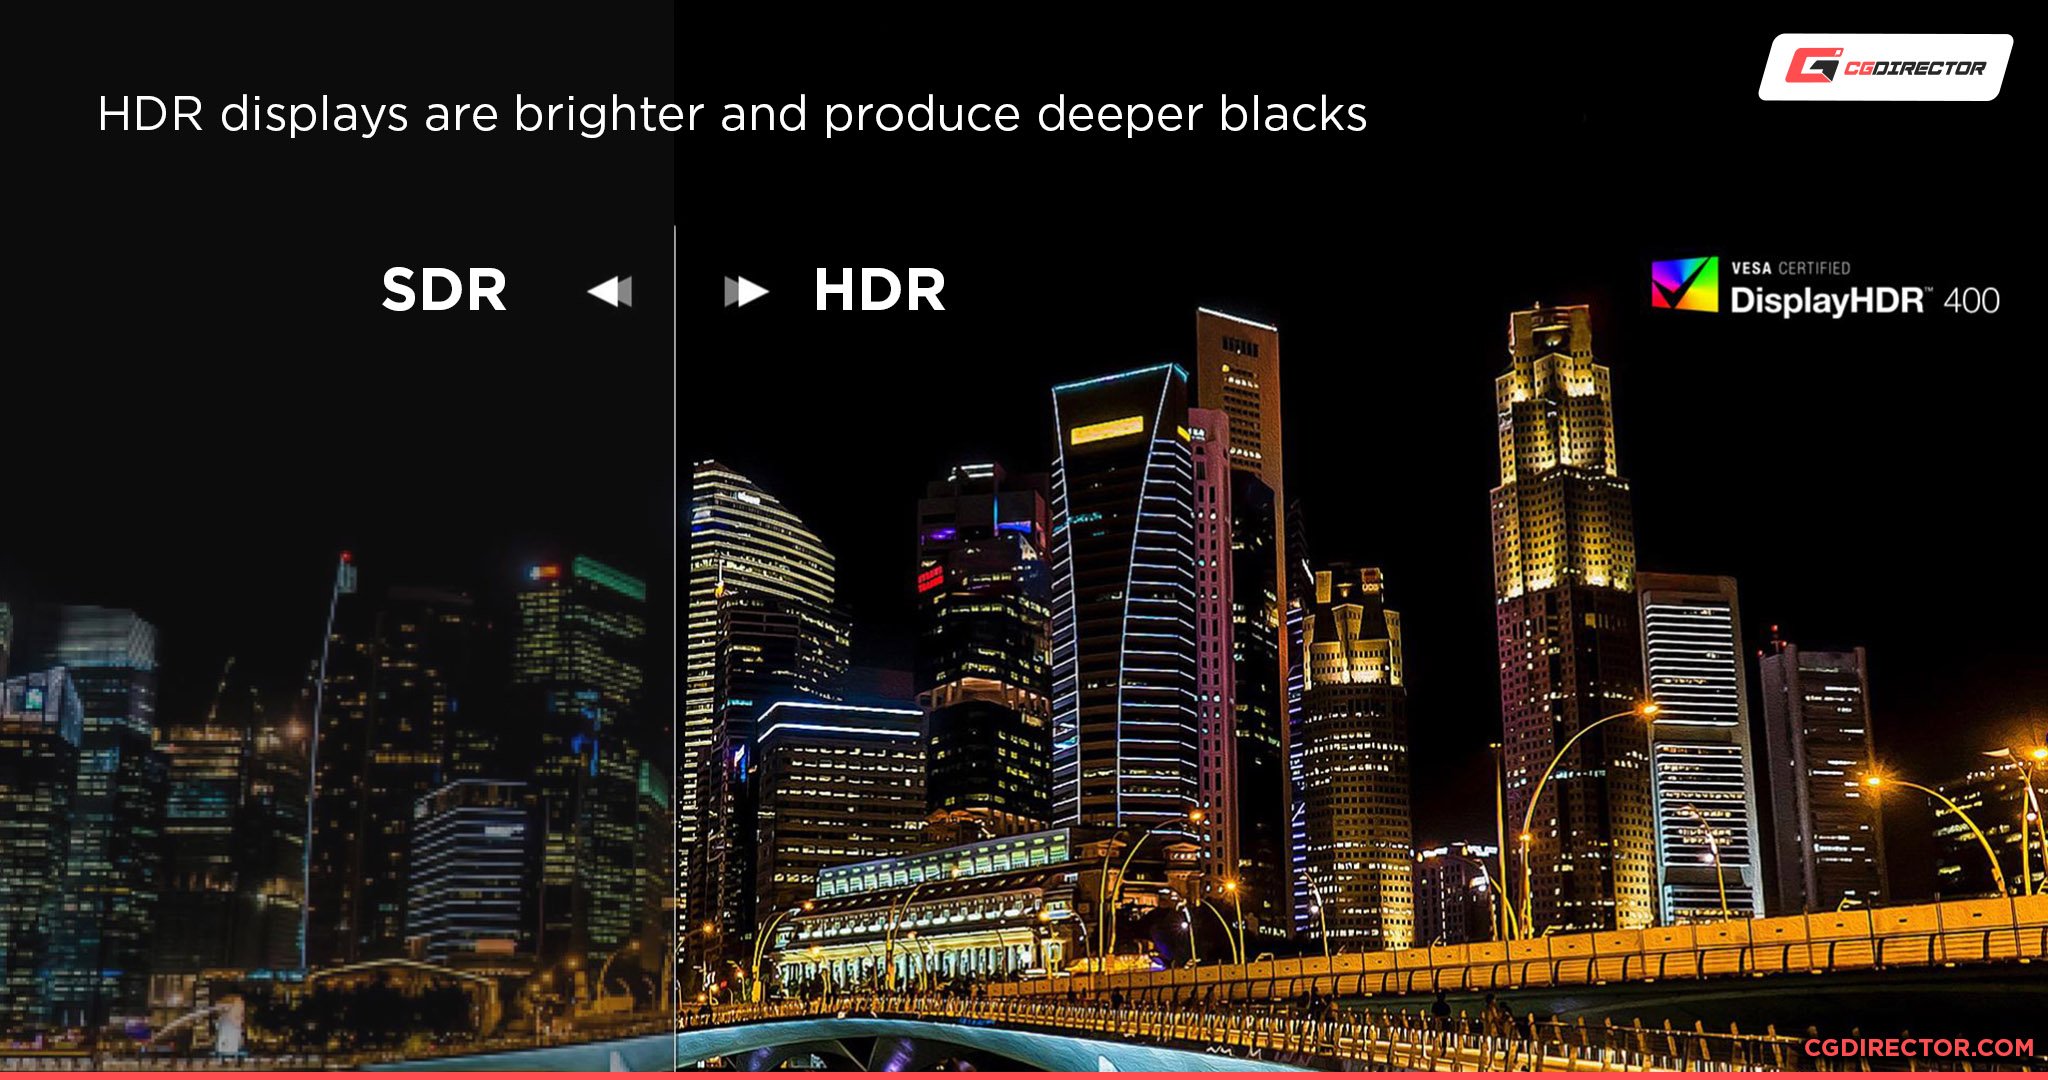 Benefits of HDR